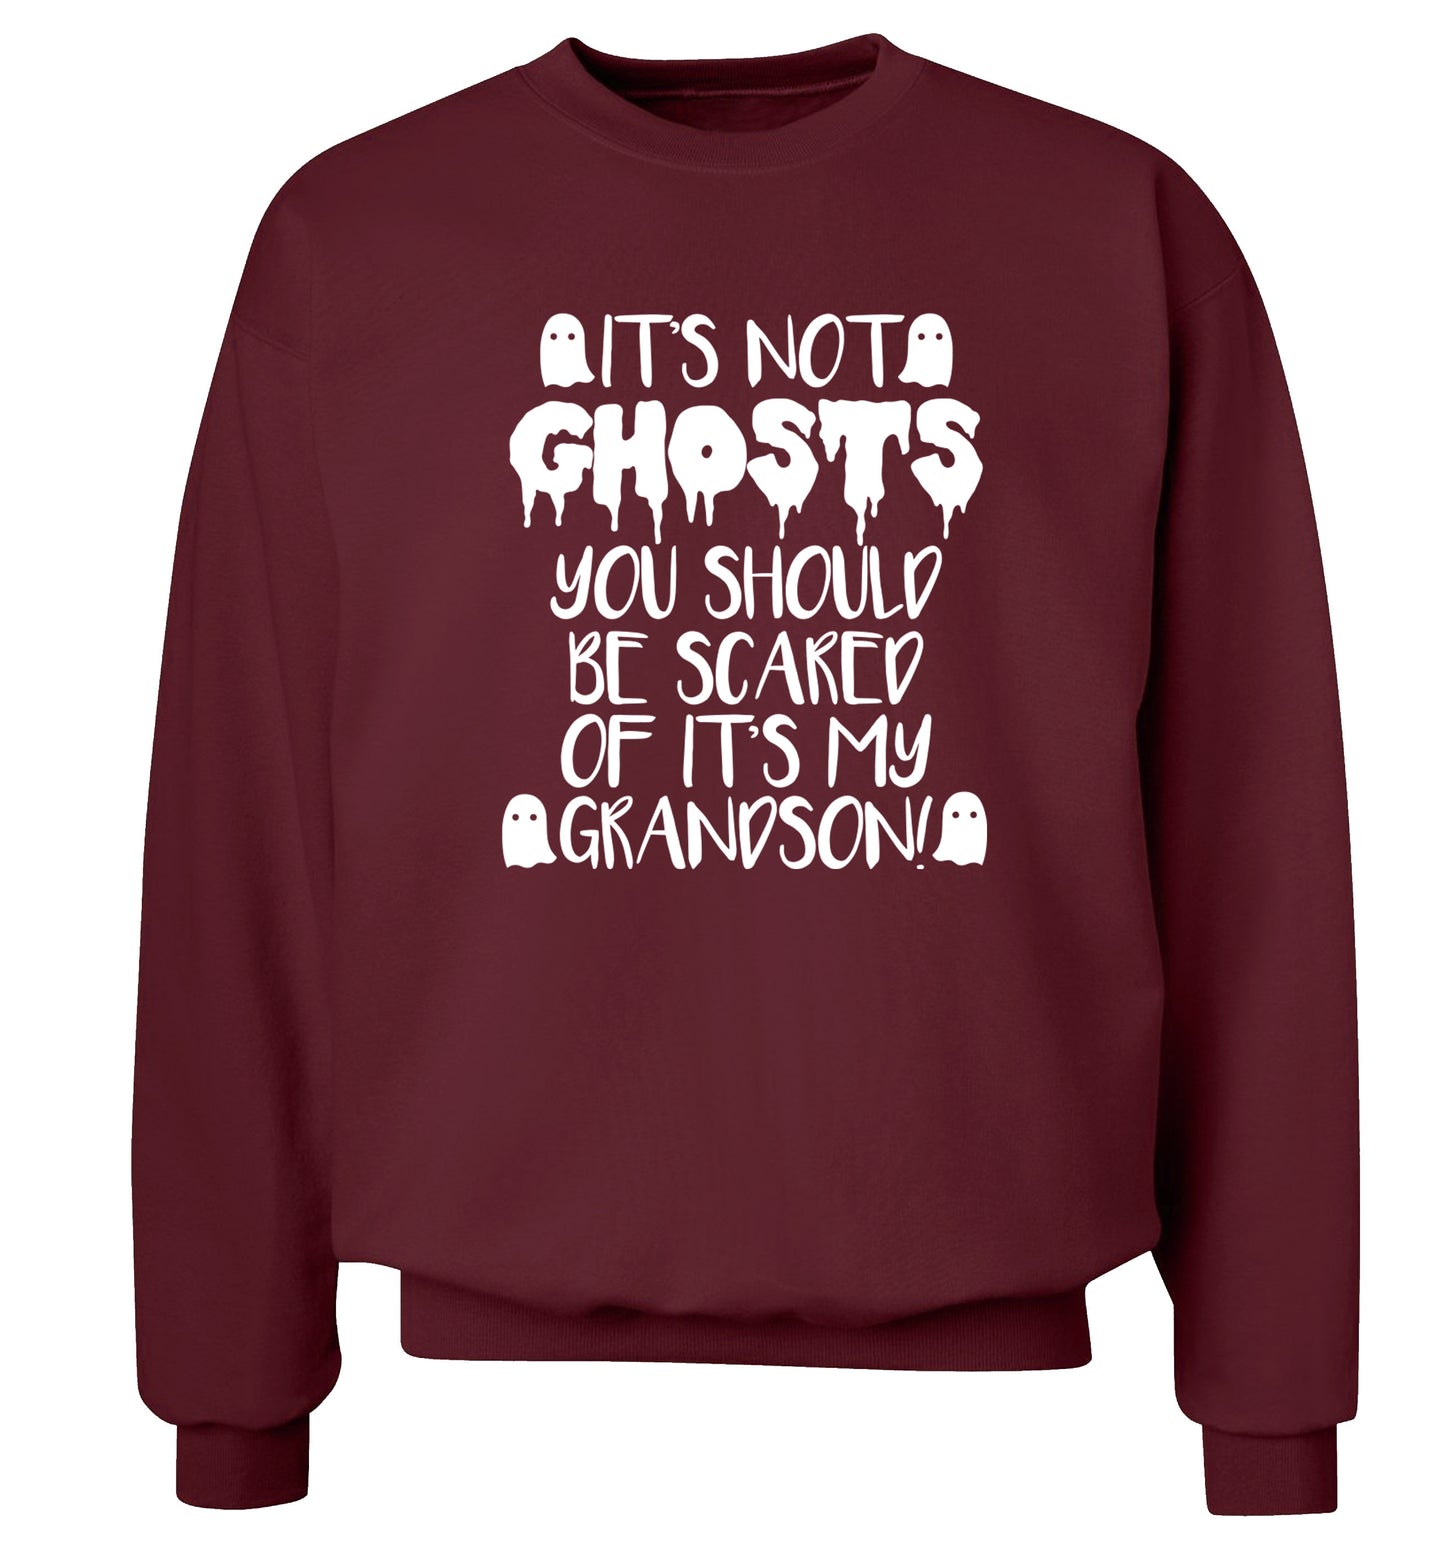 It's not ghosts you should be scared of it's my grandson! Adult's unisex maroon Sweater 2XL